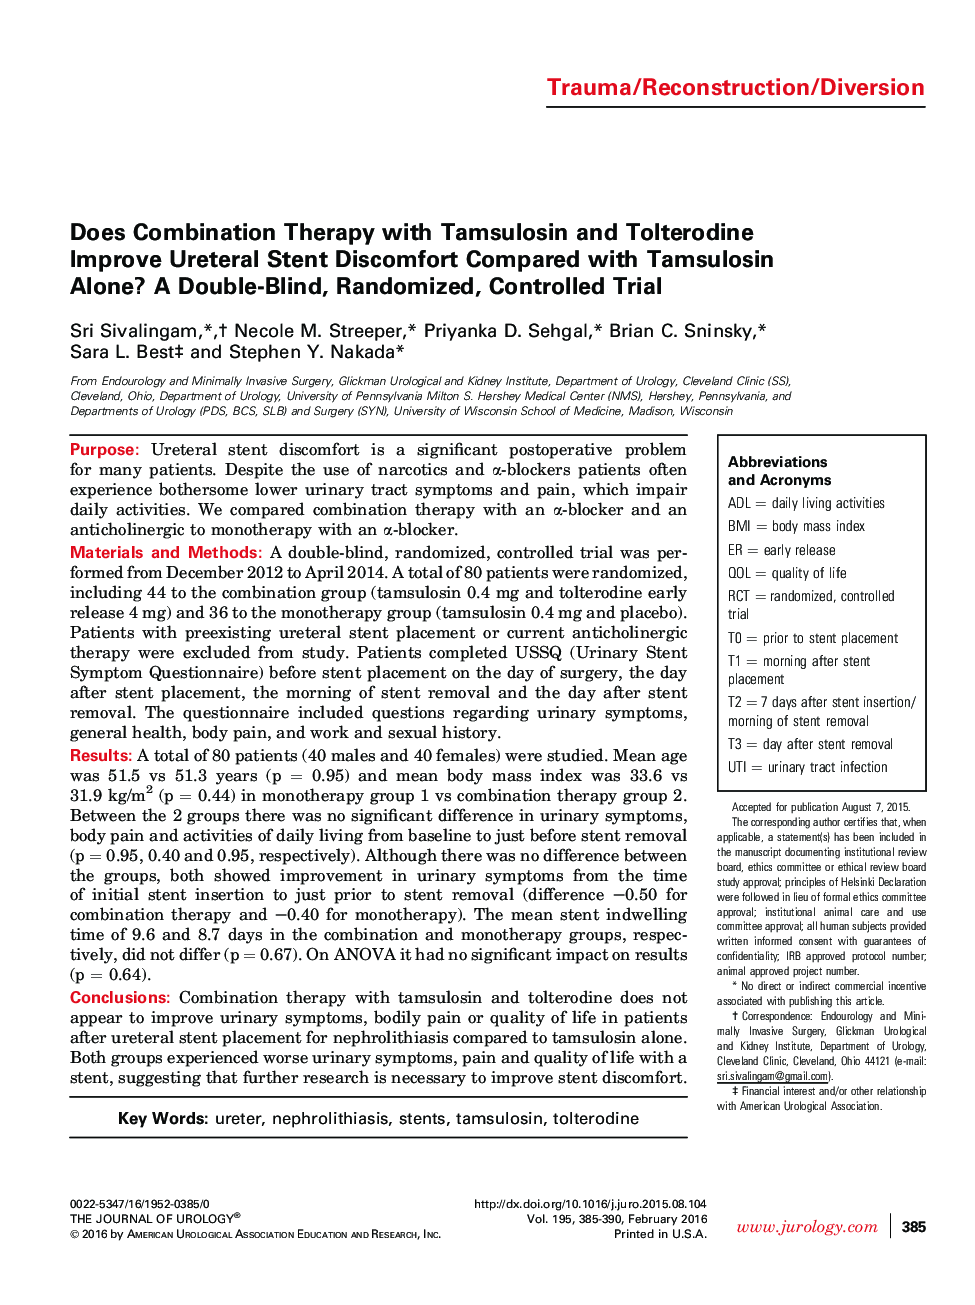 Does Combination Therapy with Tamsulosin and Tolterodine Improve Ureteral Stent Discomfort Compared with Tamsulosin Alone? A Double-Blind, Randomized, Controlled Trial 